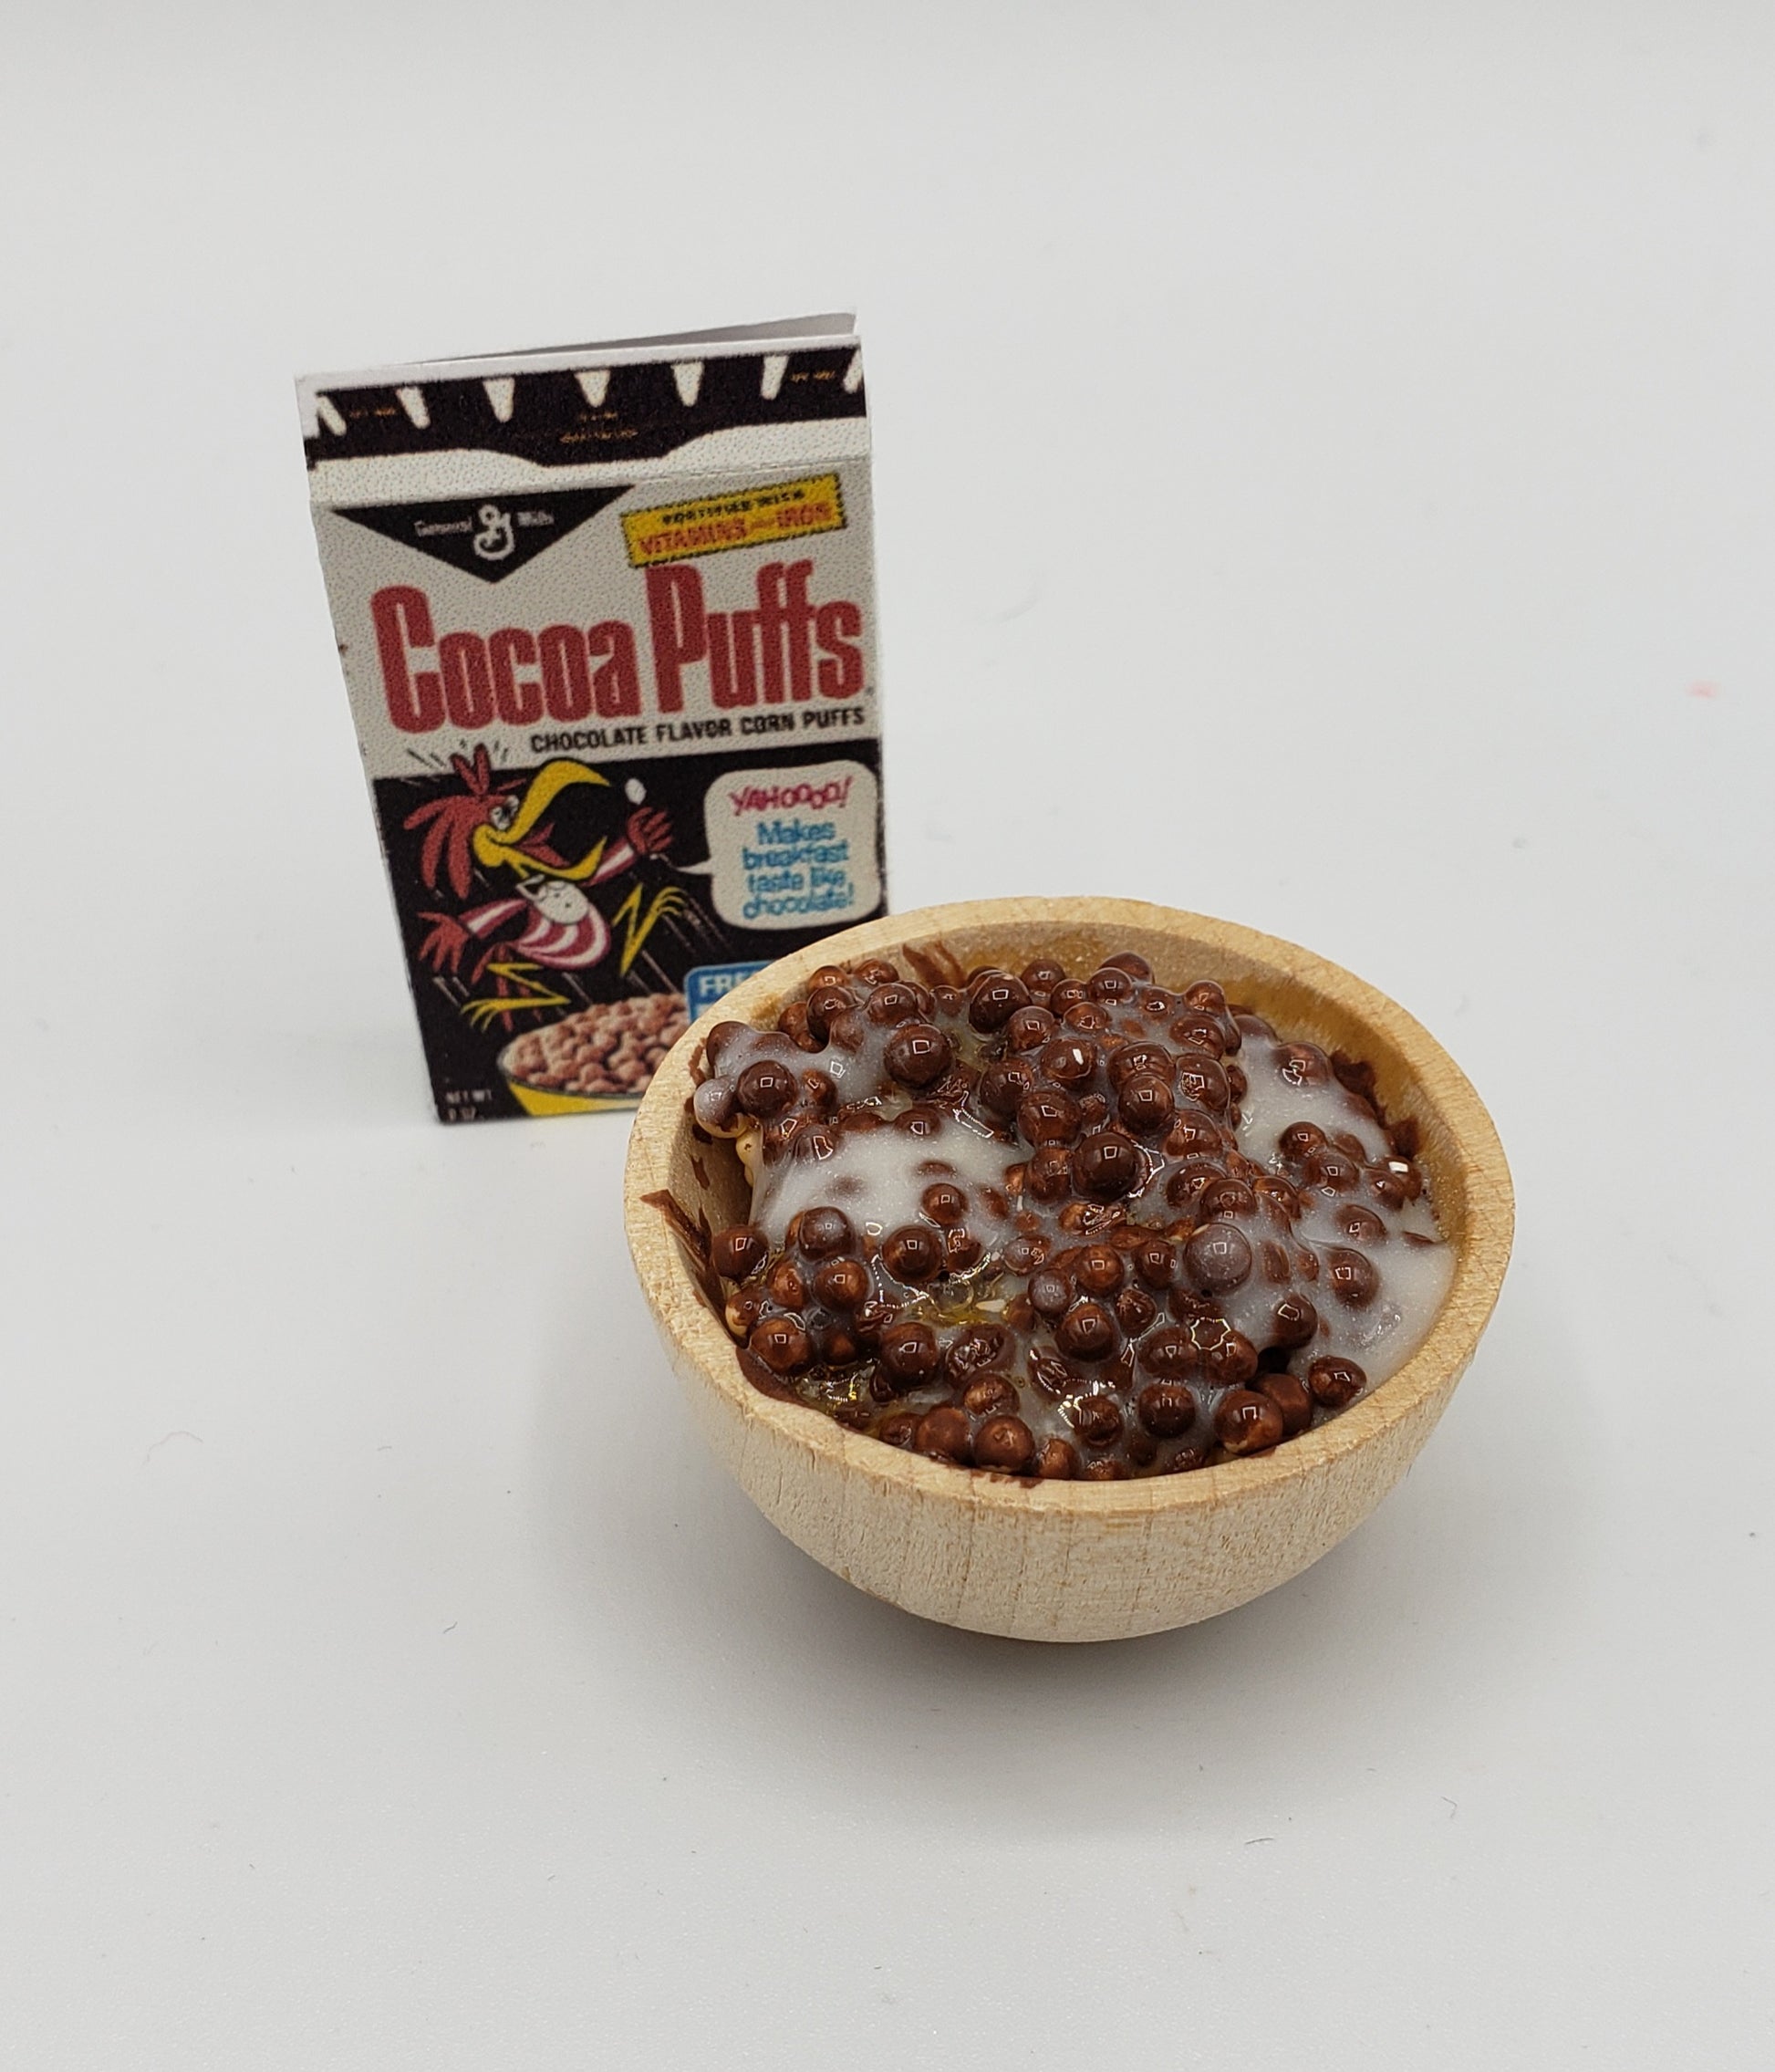 coco puffs with large cereal bowl